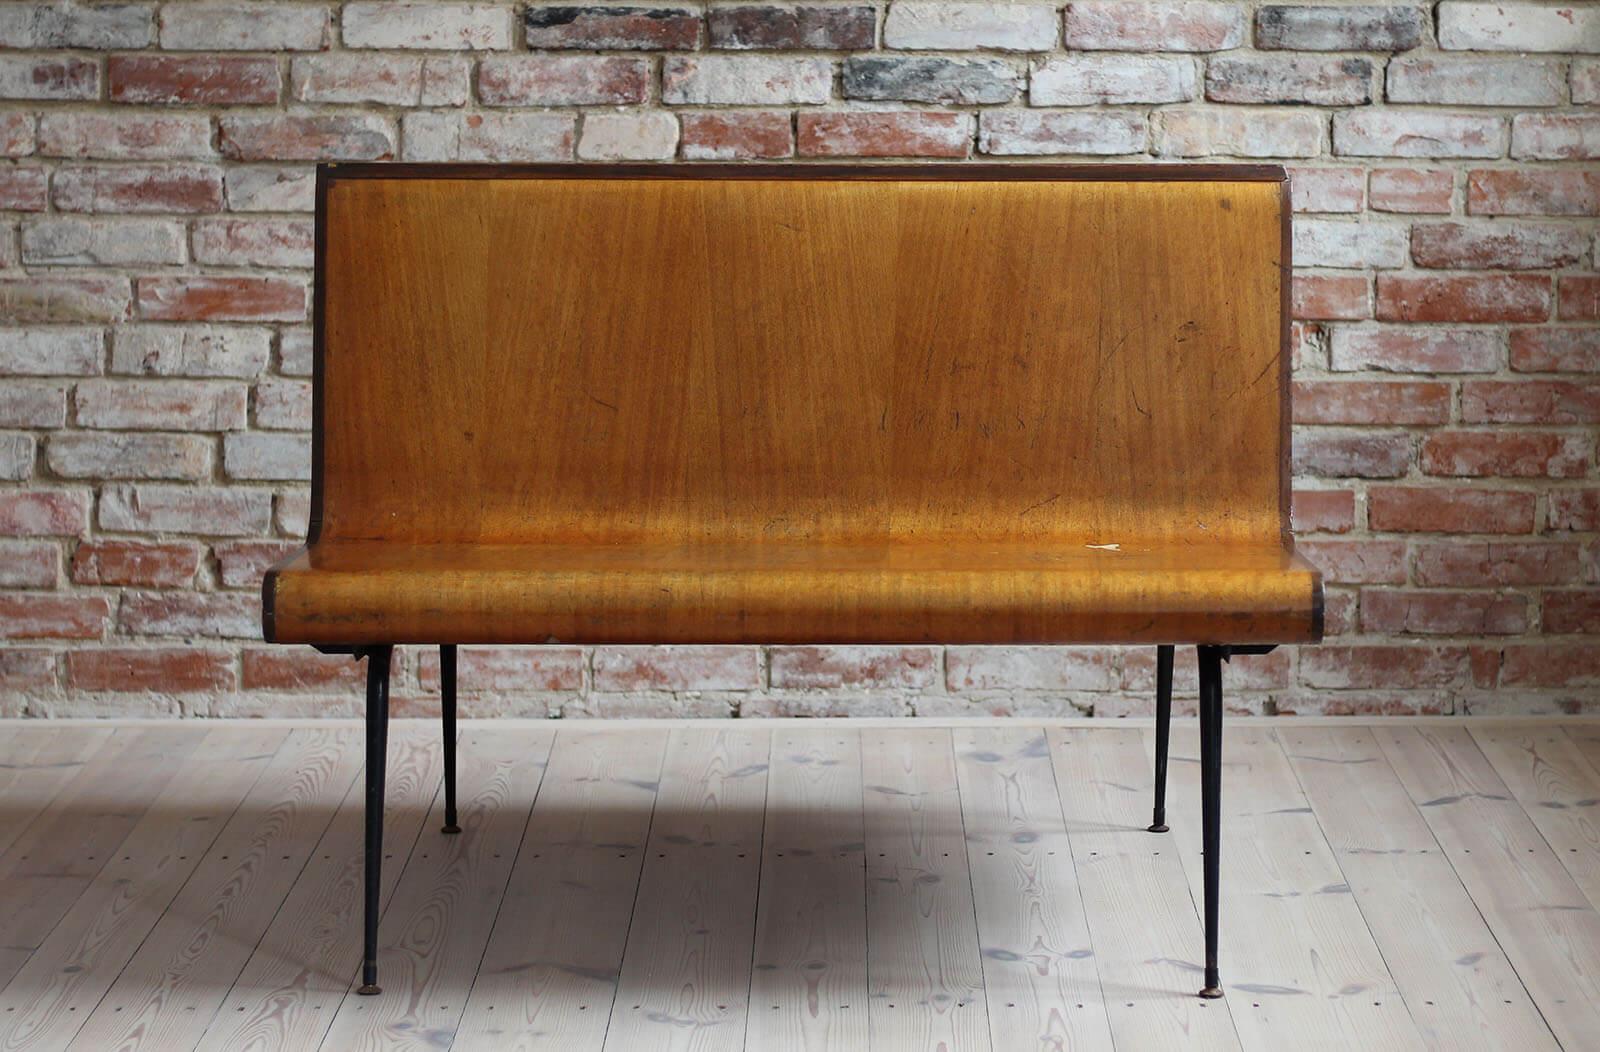 Vintage platform bench from circa 1950s or 1960s. As the previous owner claimed he had bought it in Melbourne and it served at a waiting room or platform of train station. The bench is set on a metal frame with movable feet, seating is made of wood